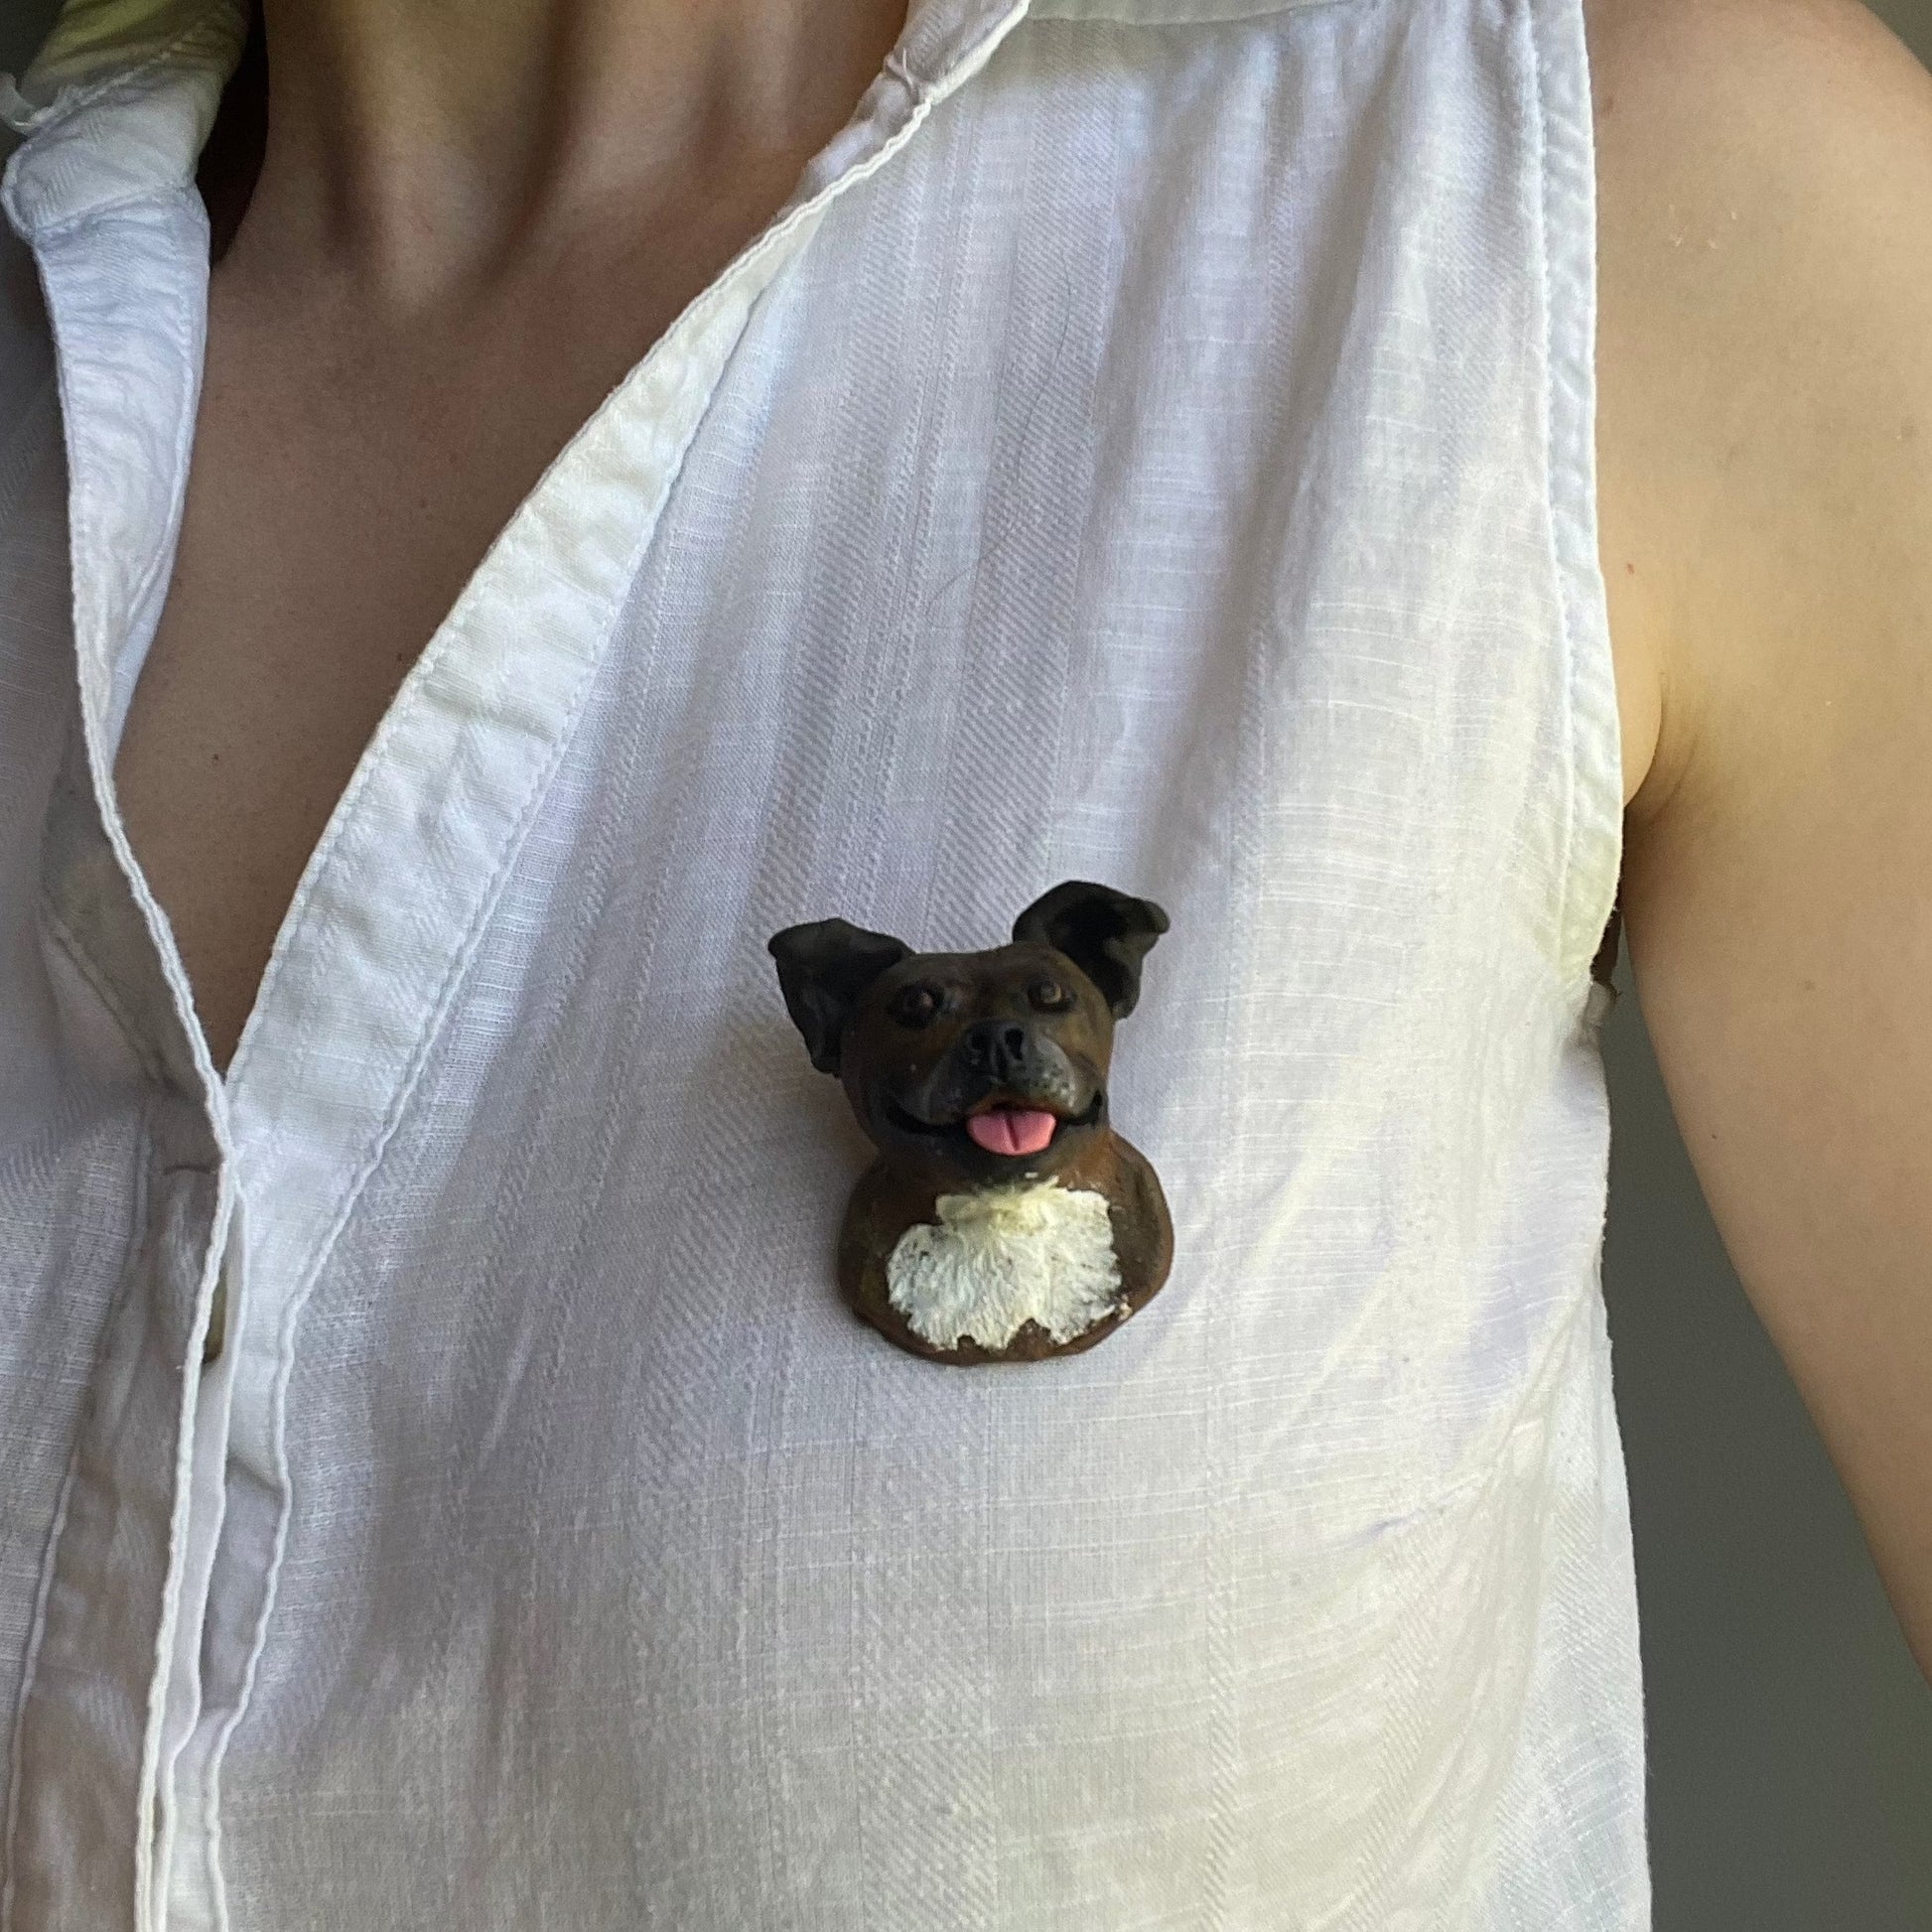 Handmade custom pet face brooch showing a brindle staffy's face, being worn on a white shirt.